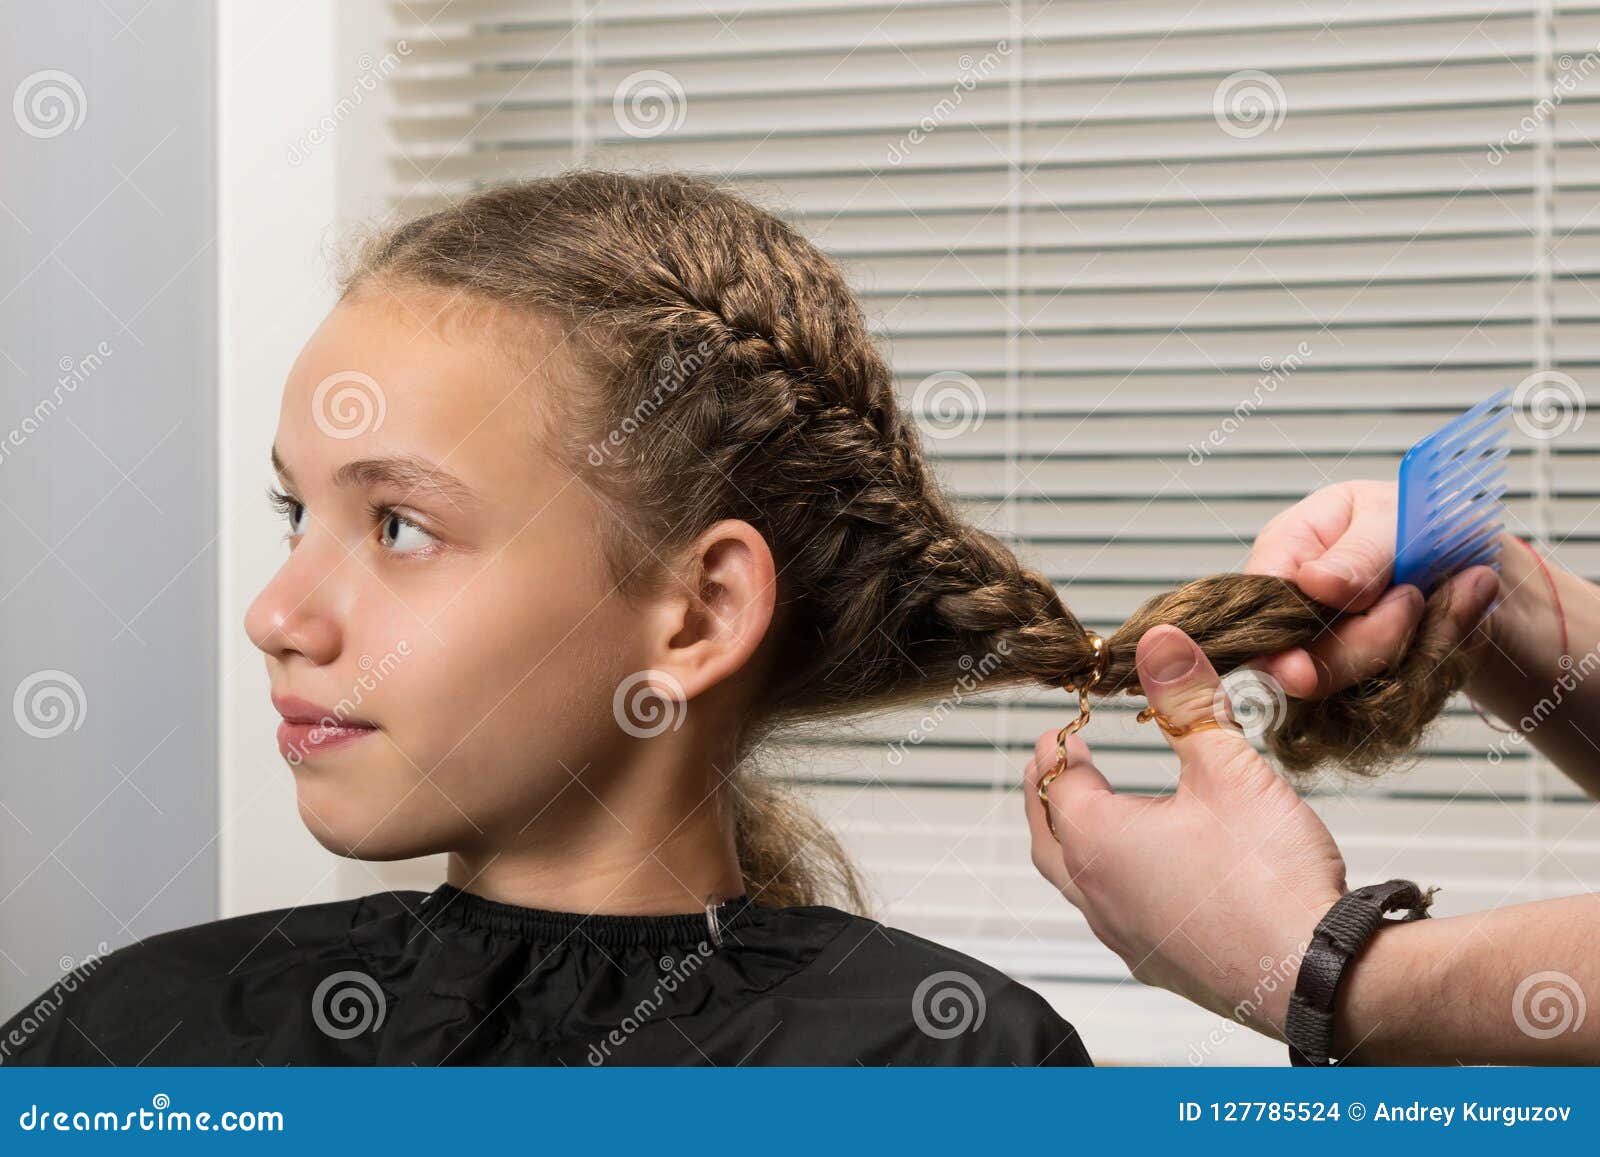 the girl sits at the master on hairdresses, does a stacking